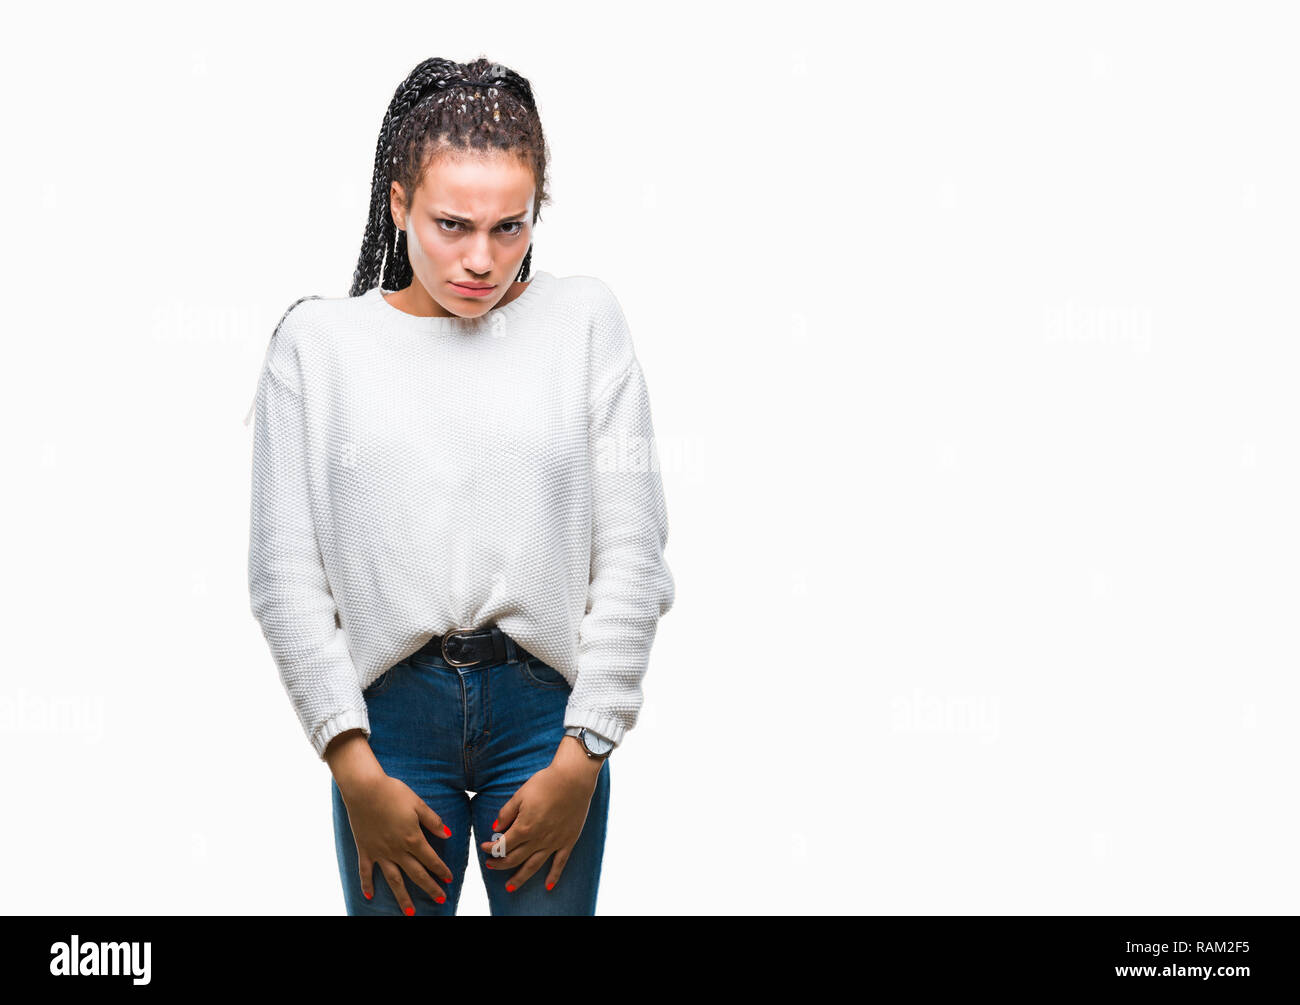 Young braided hair african american girl wearing winter sweater over isolated background skeptic and nervous, frowning upset because of problem. Negat Stock Photo